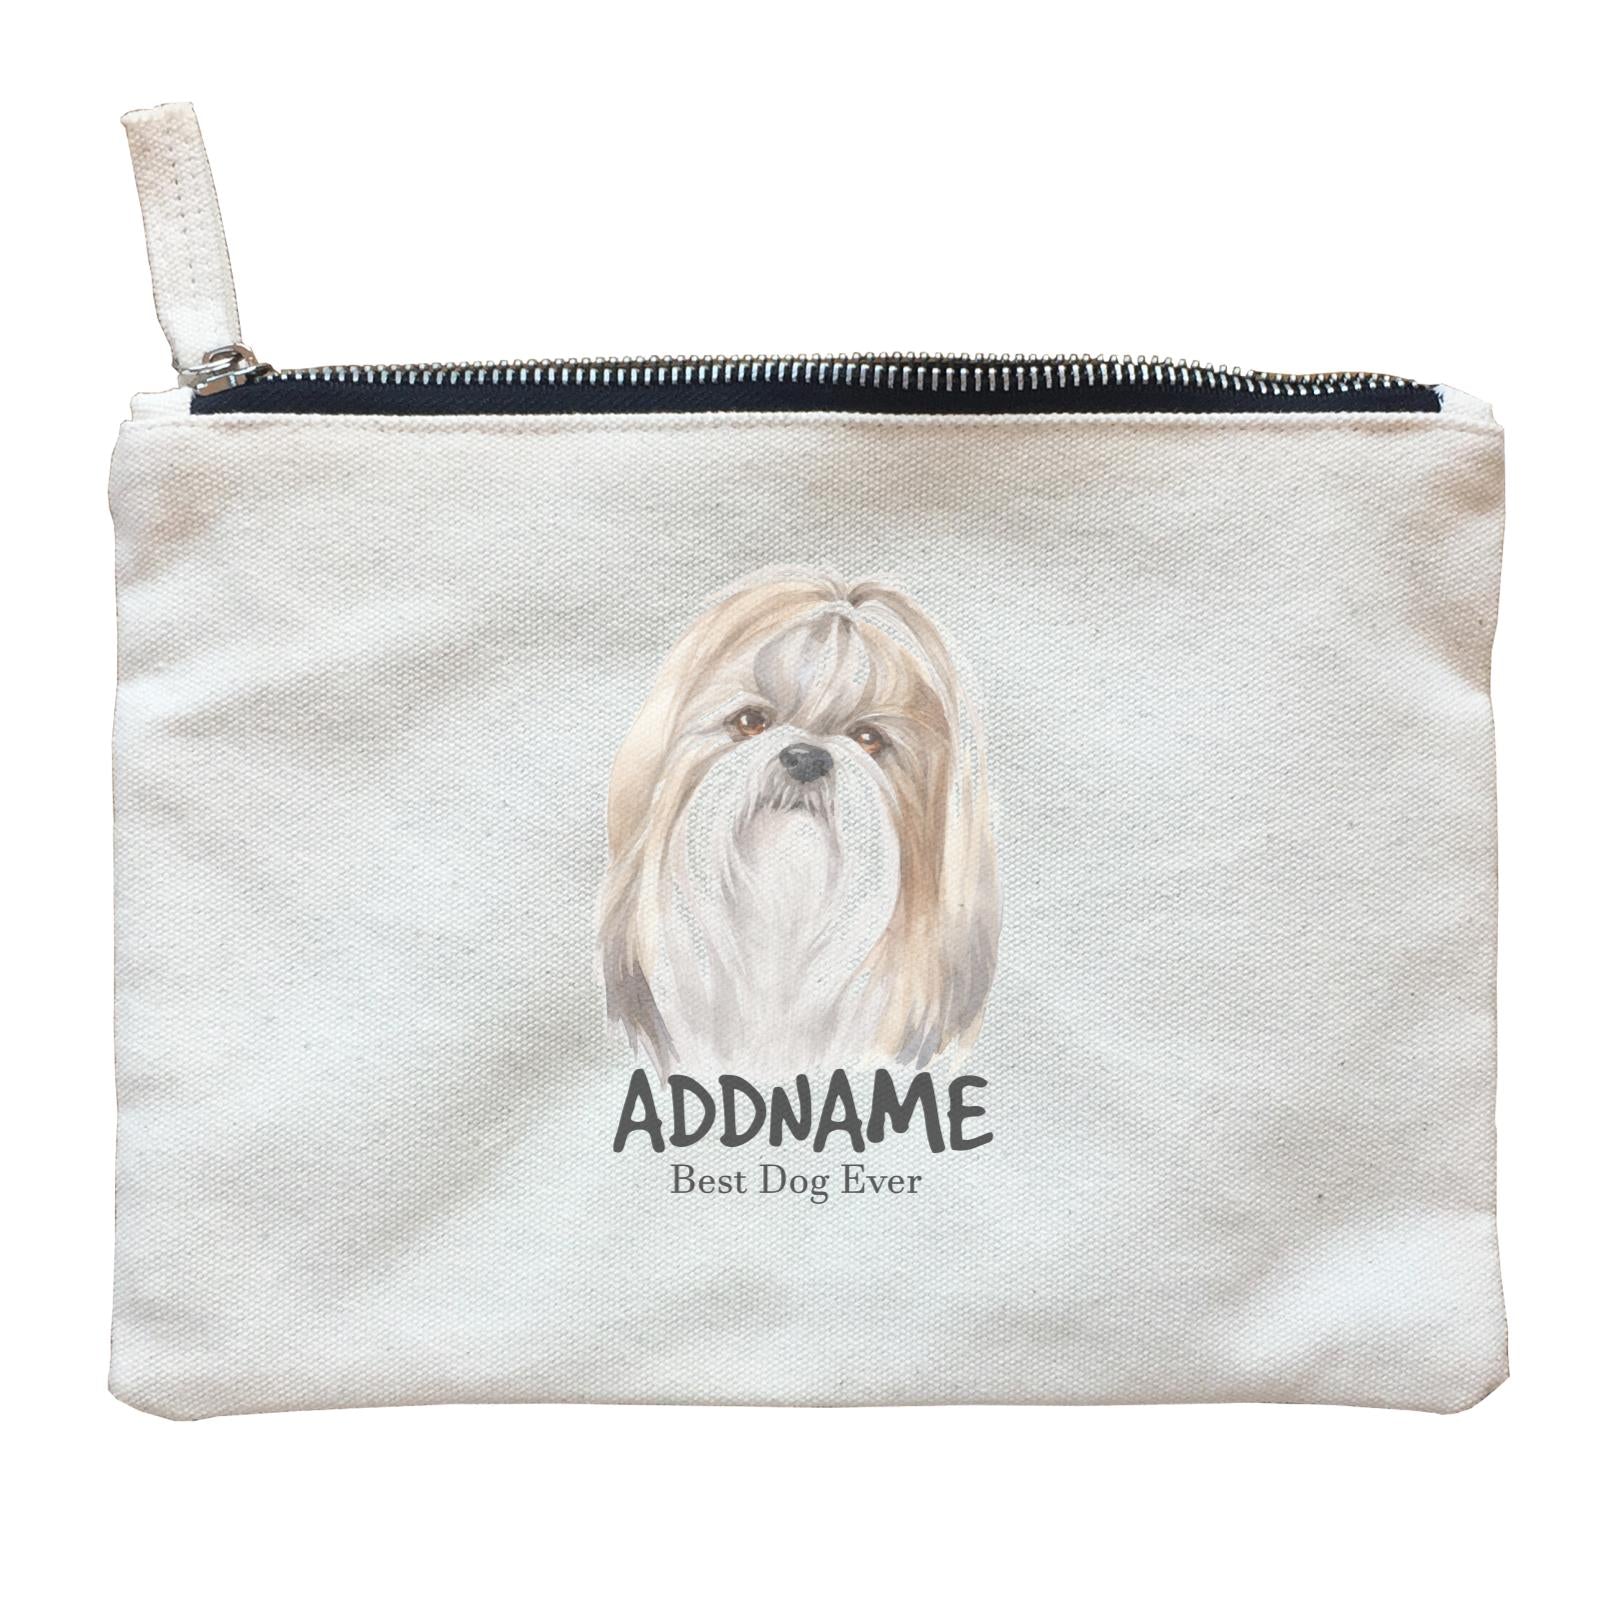 Watercolor Dog Shih Tzu Tie Hair Best Dog Ever Addname Zipper Pouch